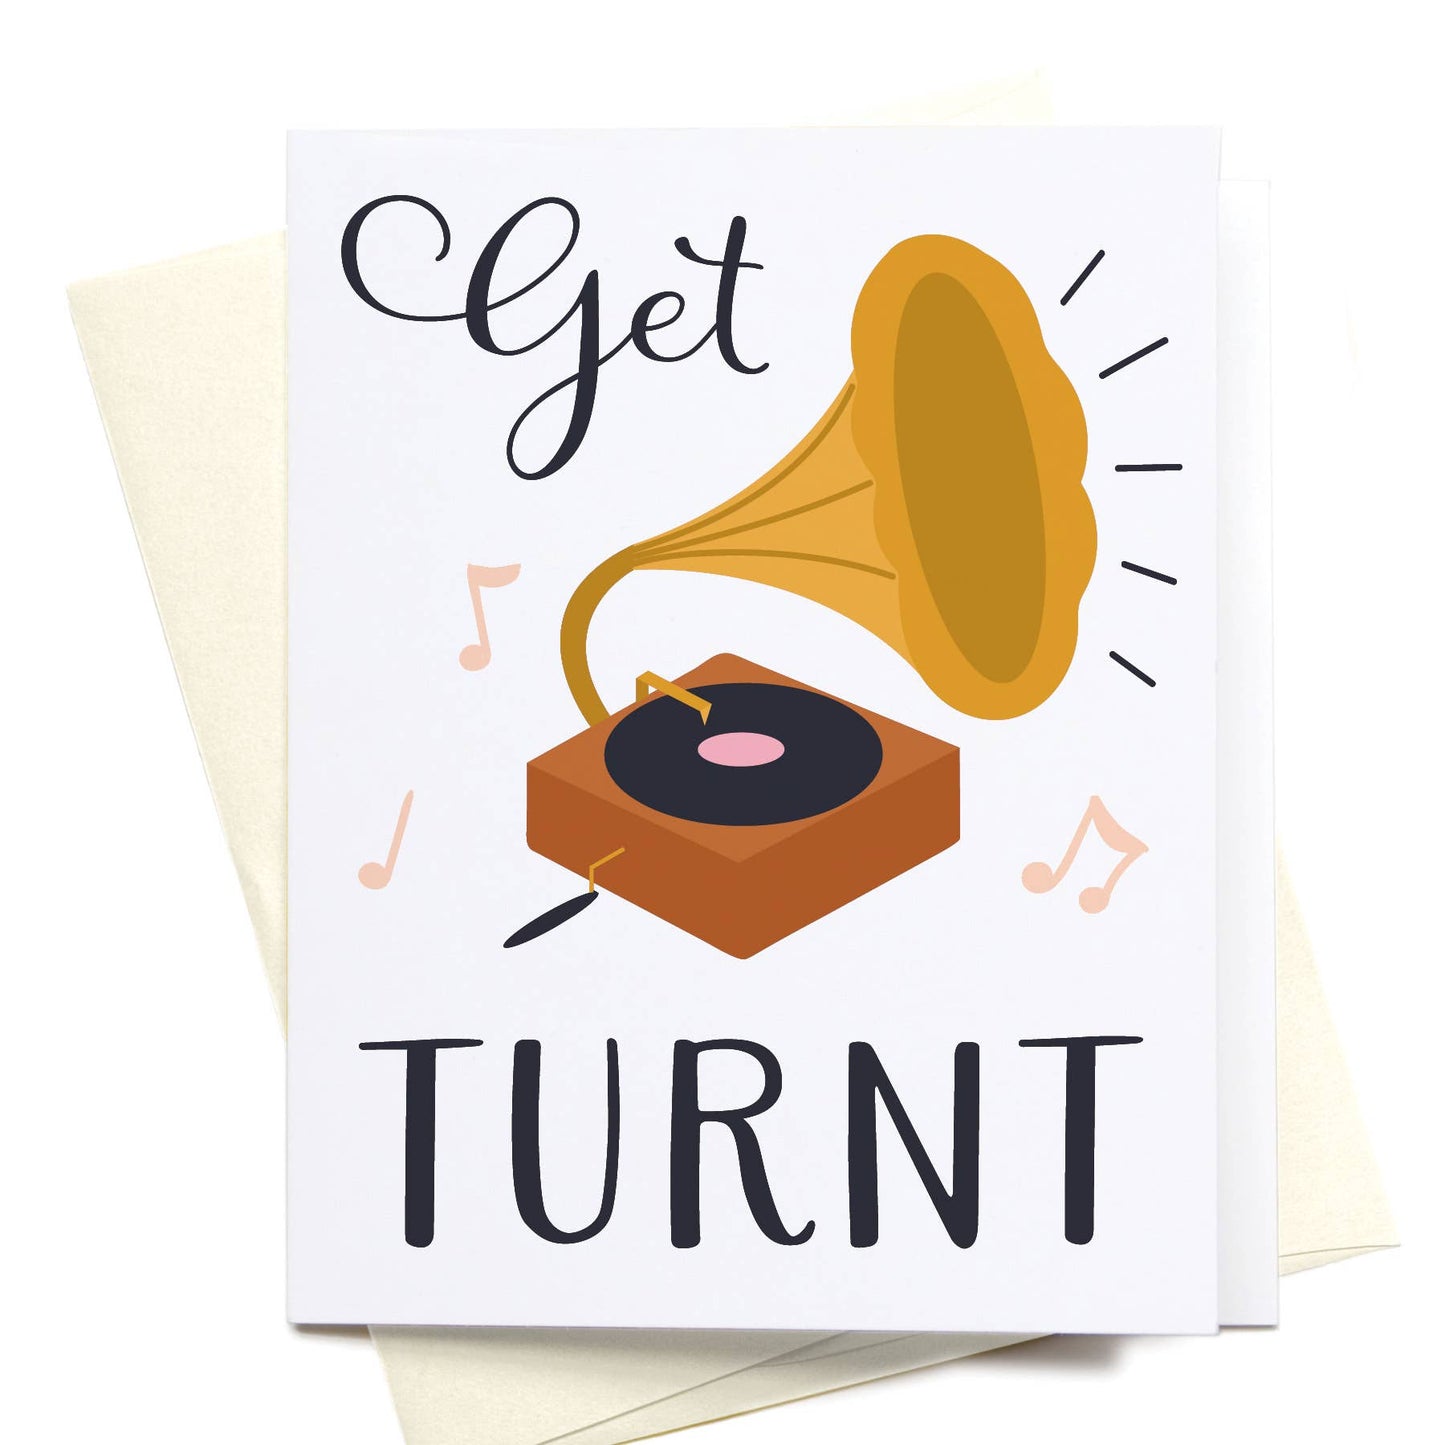 "Get Turnt" Greeting Card